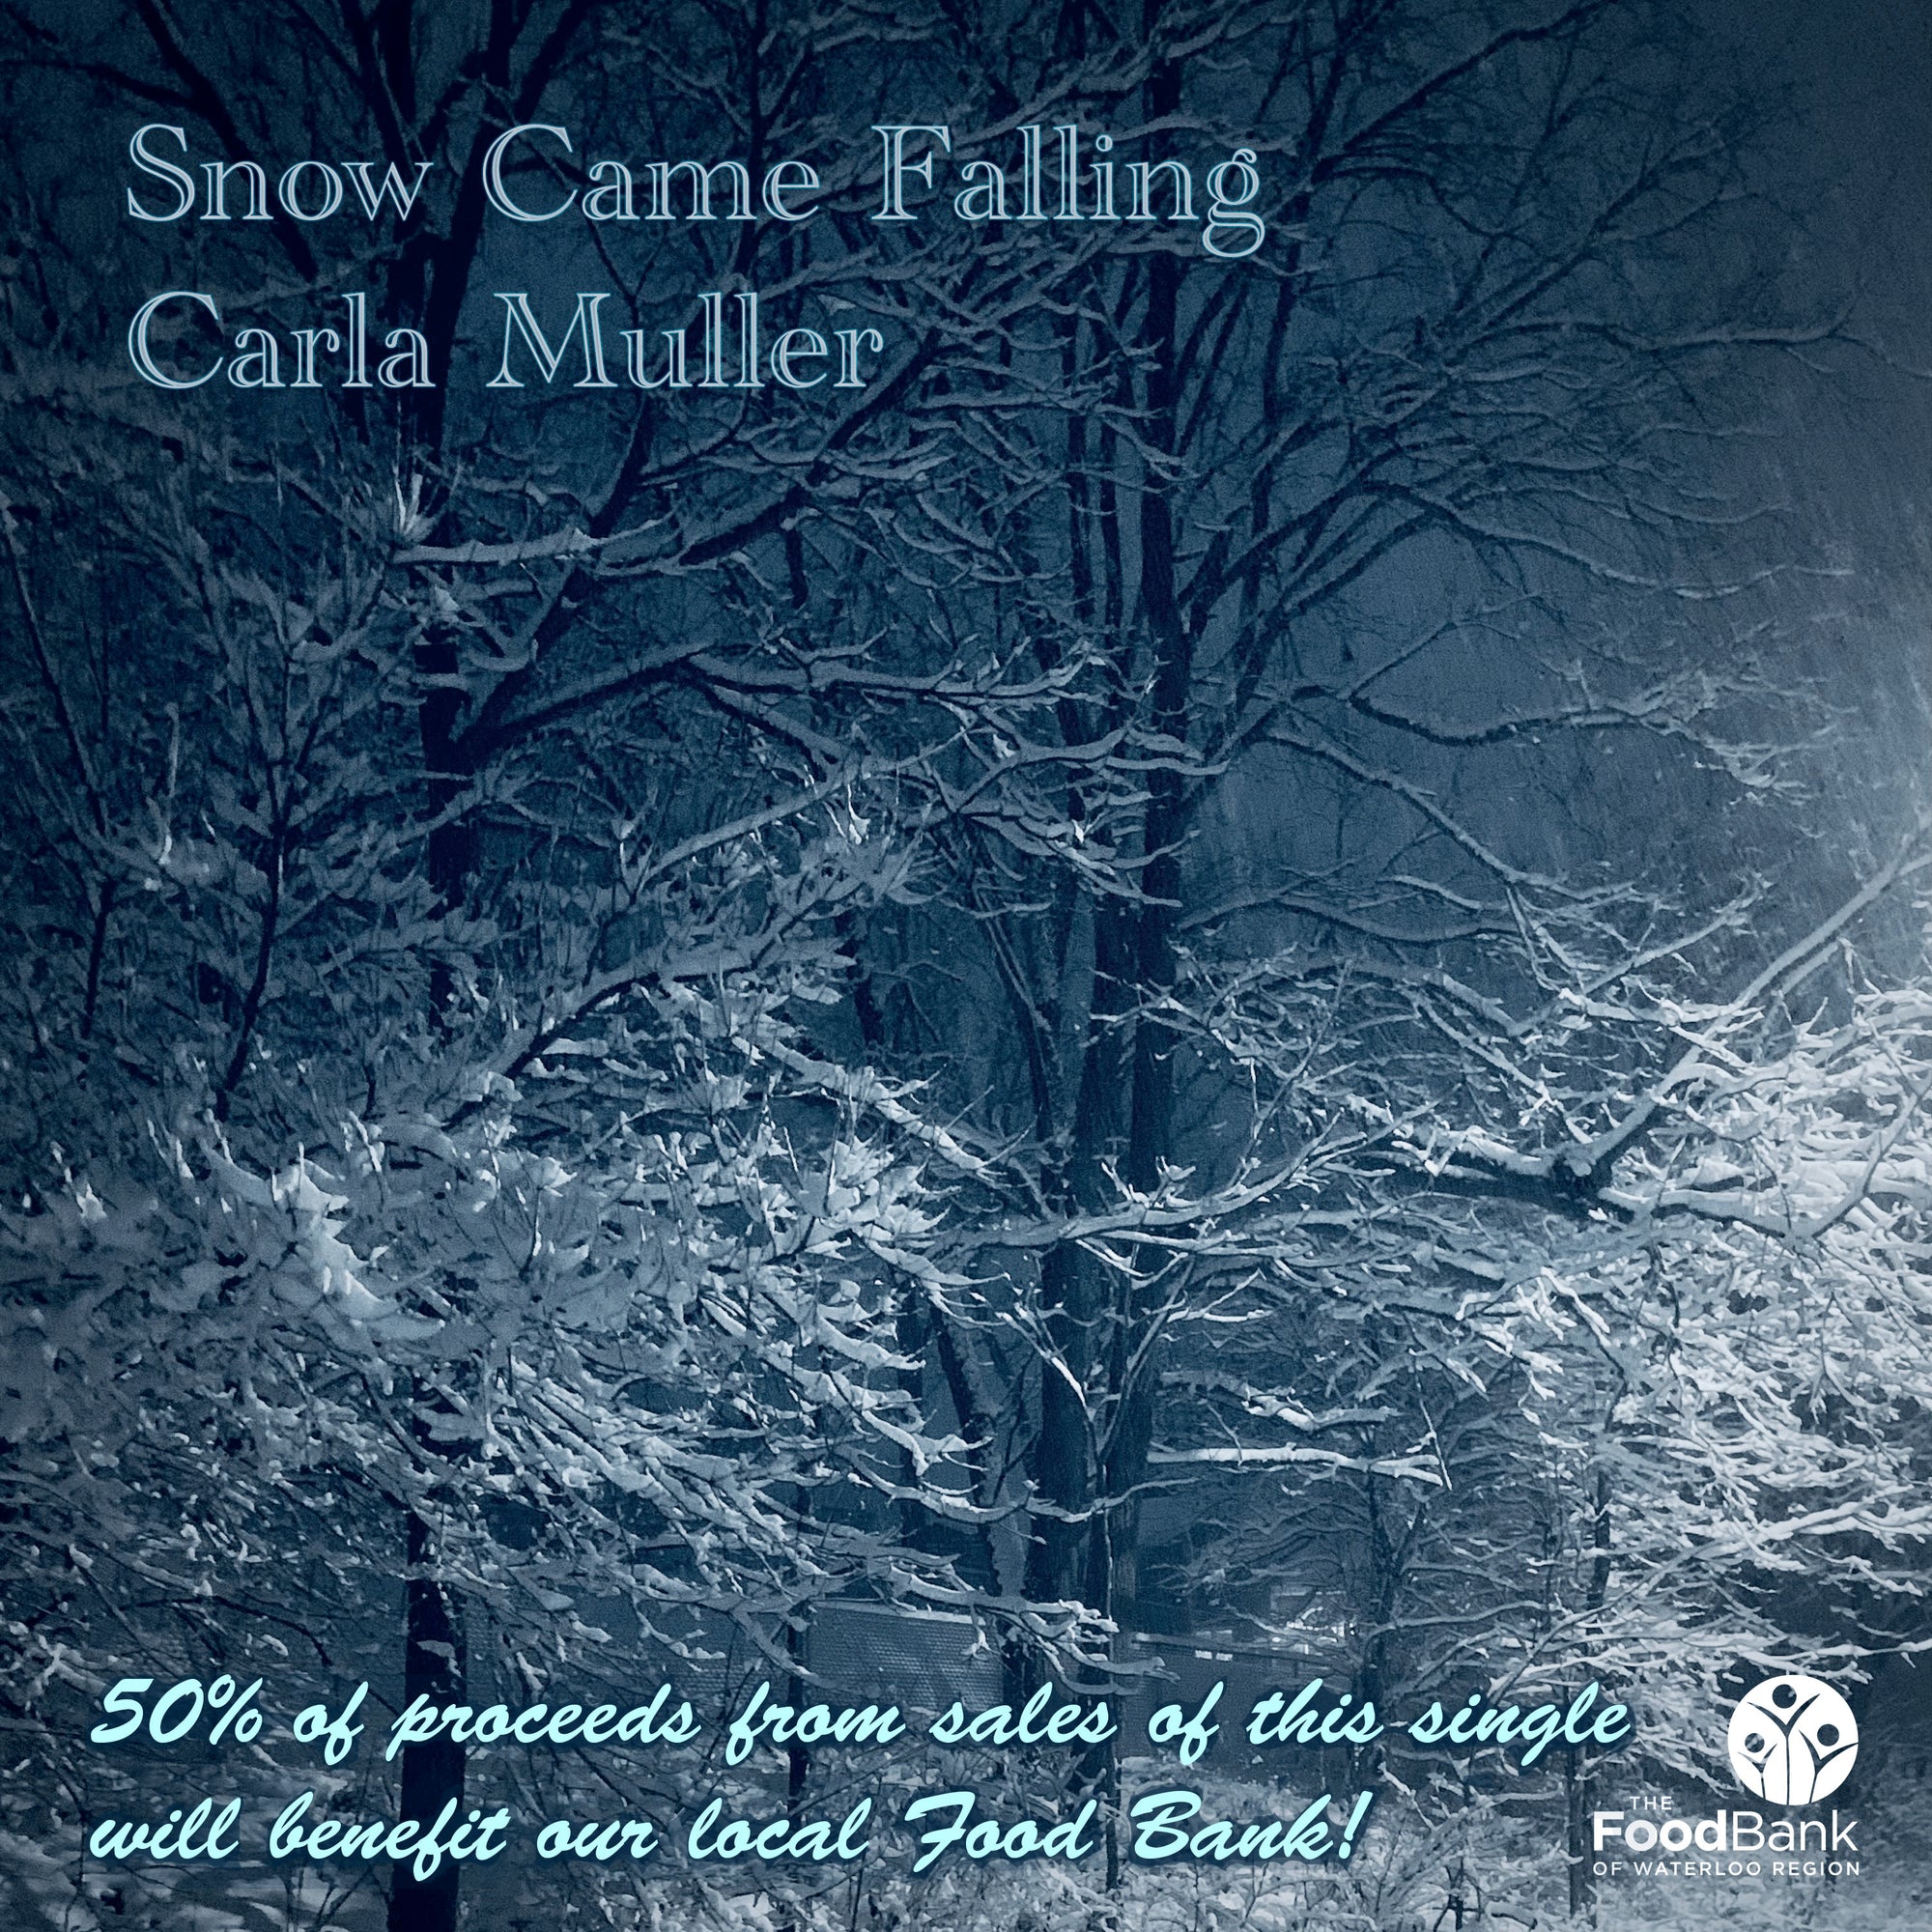 Snow Came Falling by Carla Muller (single on CD) - Shine A Little Light Food Bank of Waterloo Region Benefit